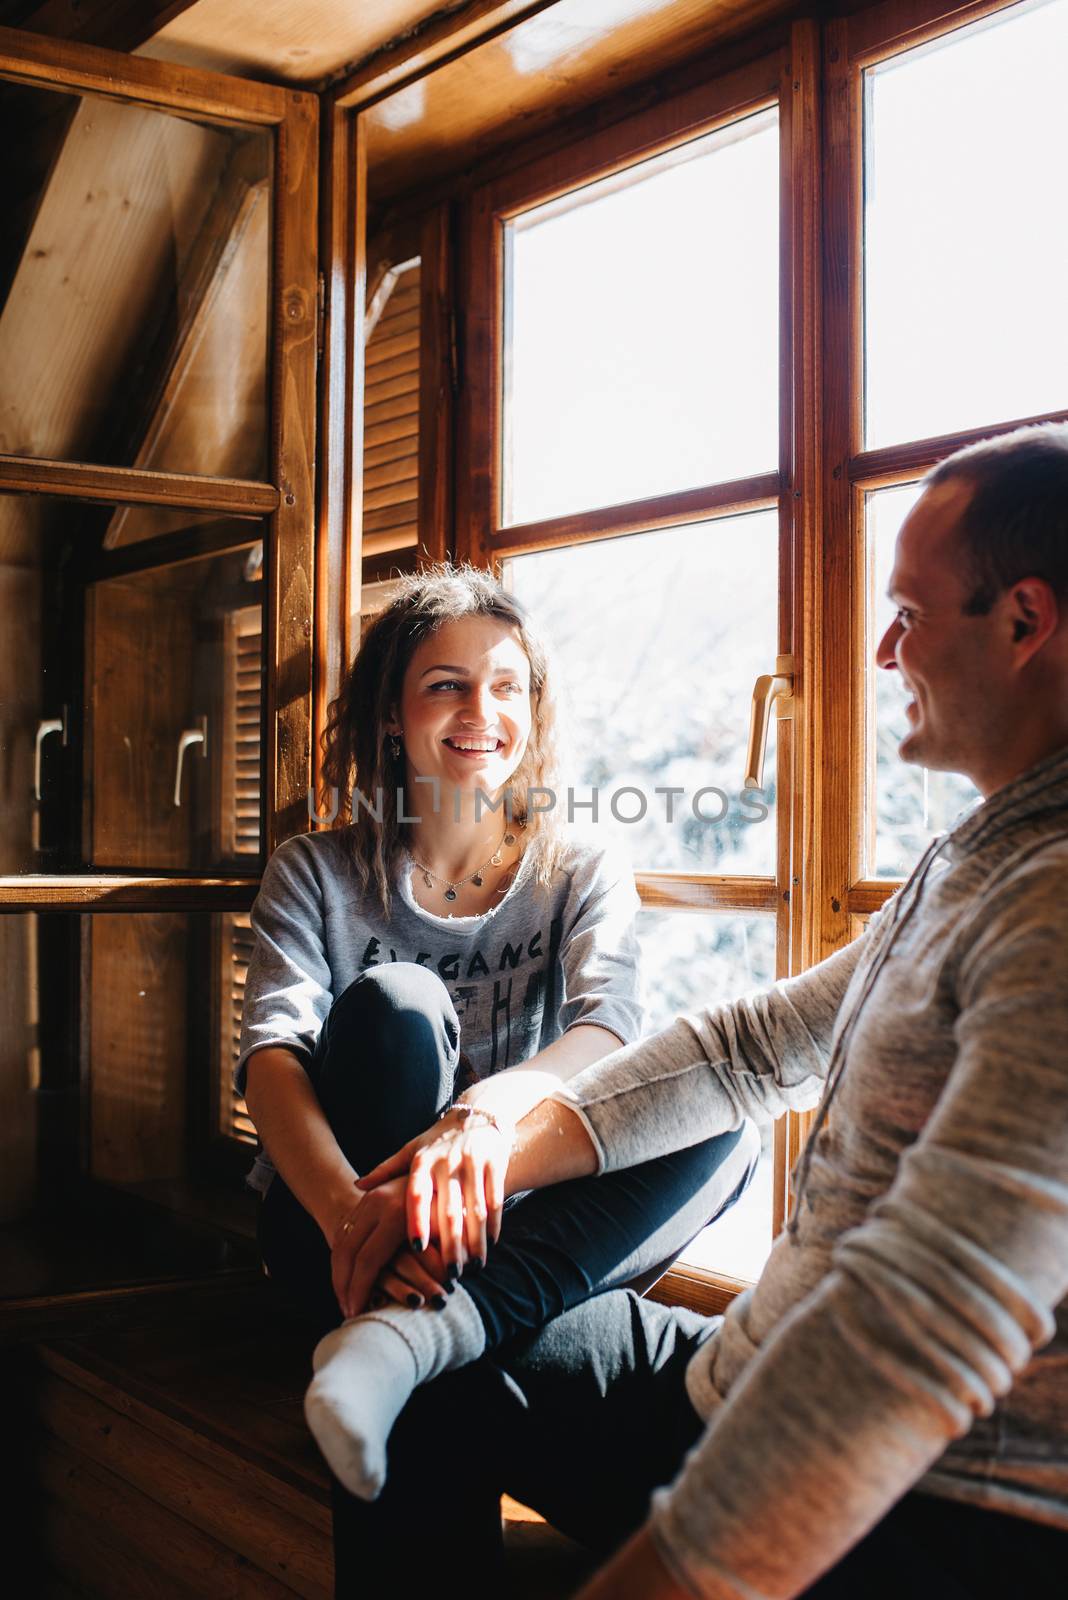 guy and girl in the house near the window overlooking by Andreua